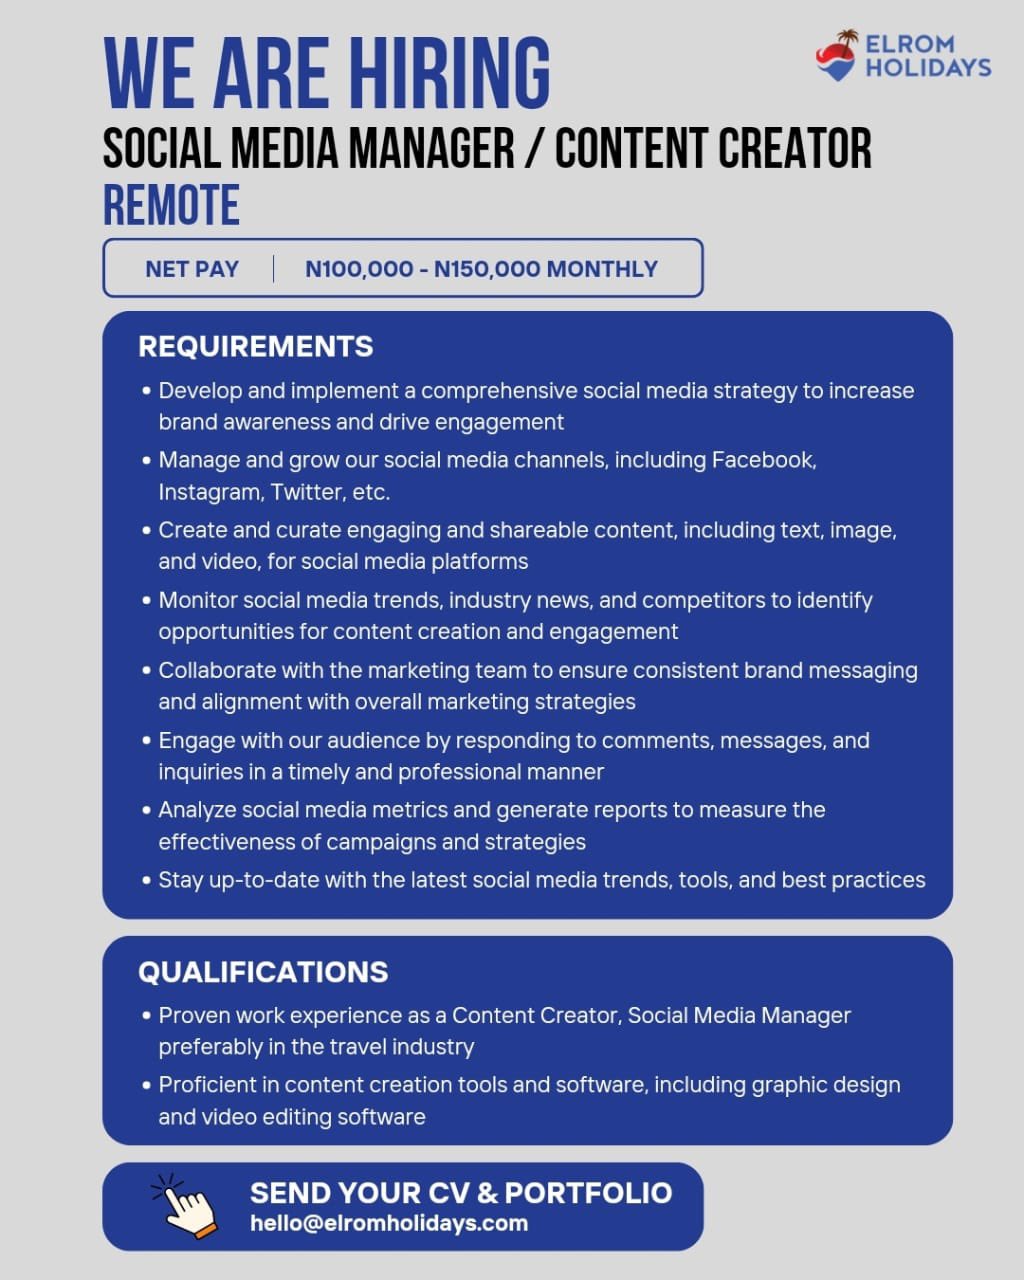 Elrom Holidays: Remote Social Media Manager / Content Creators Needed